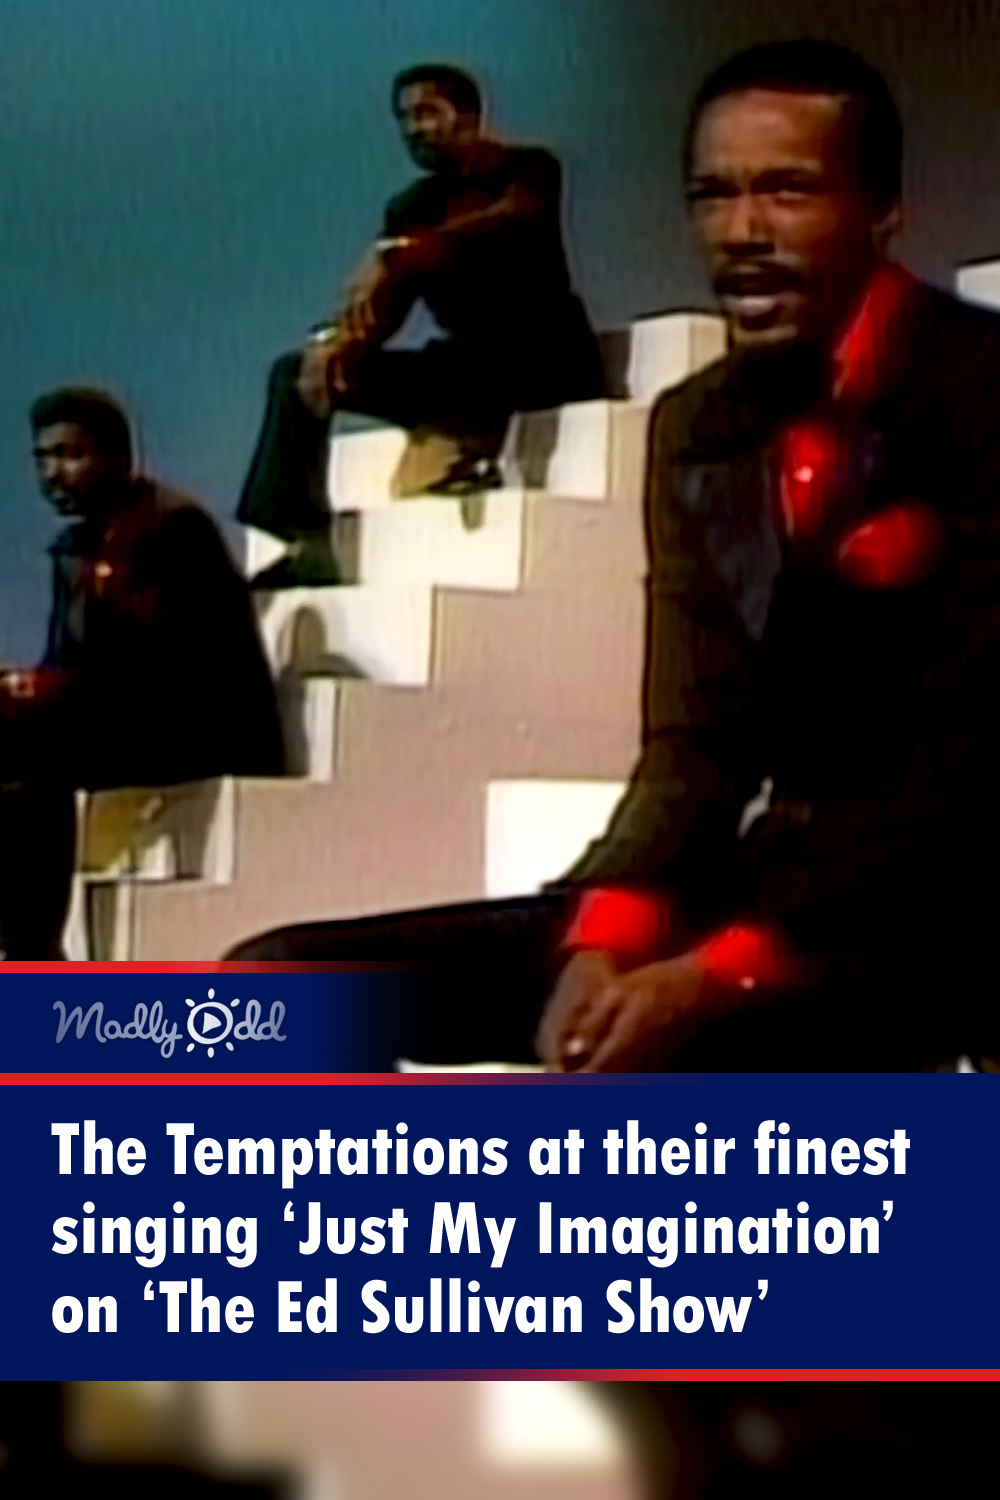 The Temptations at their finest singing ‘Just My Imagination’ on ‘The Ed Sullivan Show’